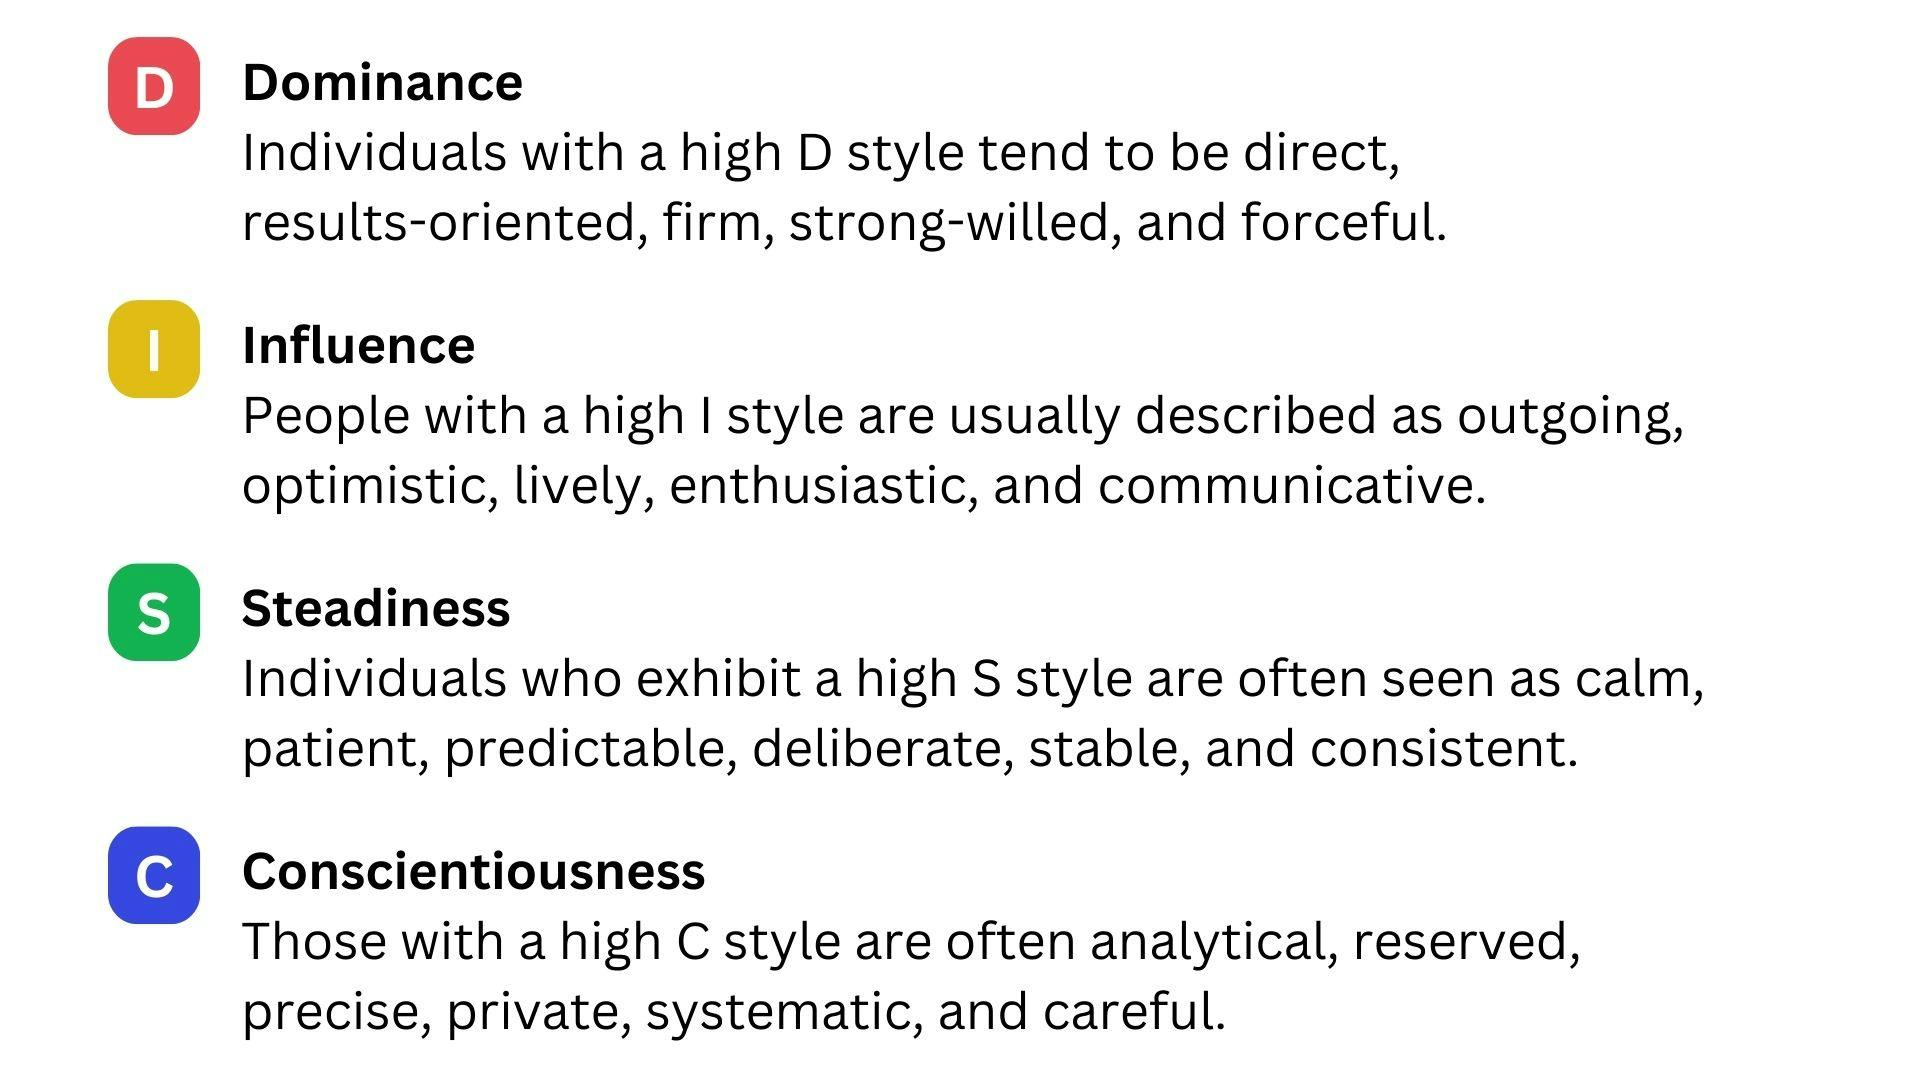 Graphic describing the 4 dimensions of behavior measured by the DISC assessment. D - Dominance: Individuals with a high D tend to be direct, result-oriented, firm, strong-willed and forceful. I - Influence: People witha high I style are usualy described as being outgoing, optimistic, lively, enthusiastic, and communicative. S - Steadiness. Individuals who exhibit a high S style are often seen as calm, patient, predictable, deliberate, stable, and consistent. C - Conscientiousness: Those with a high C style are often analytical, reserved precise private, systematic, and careful. 